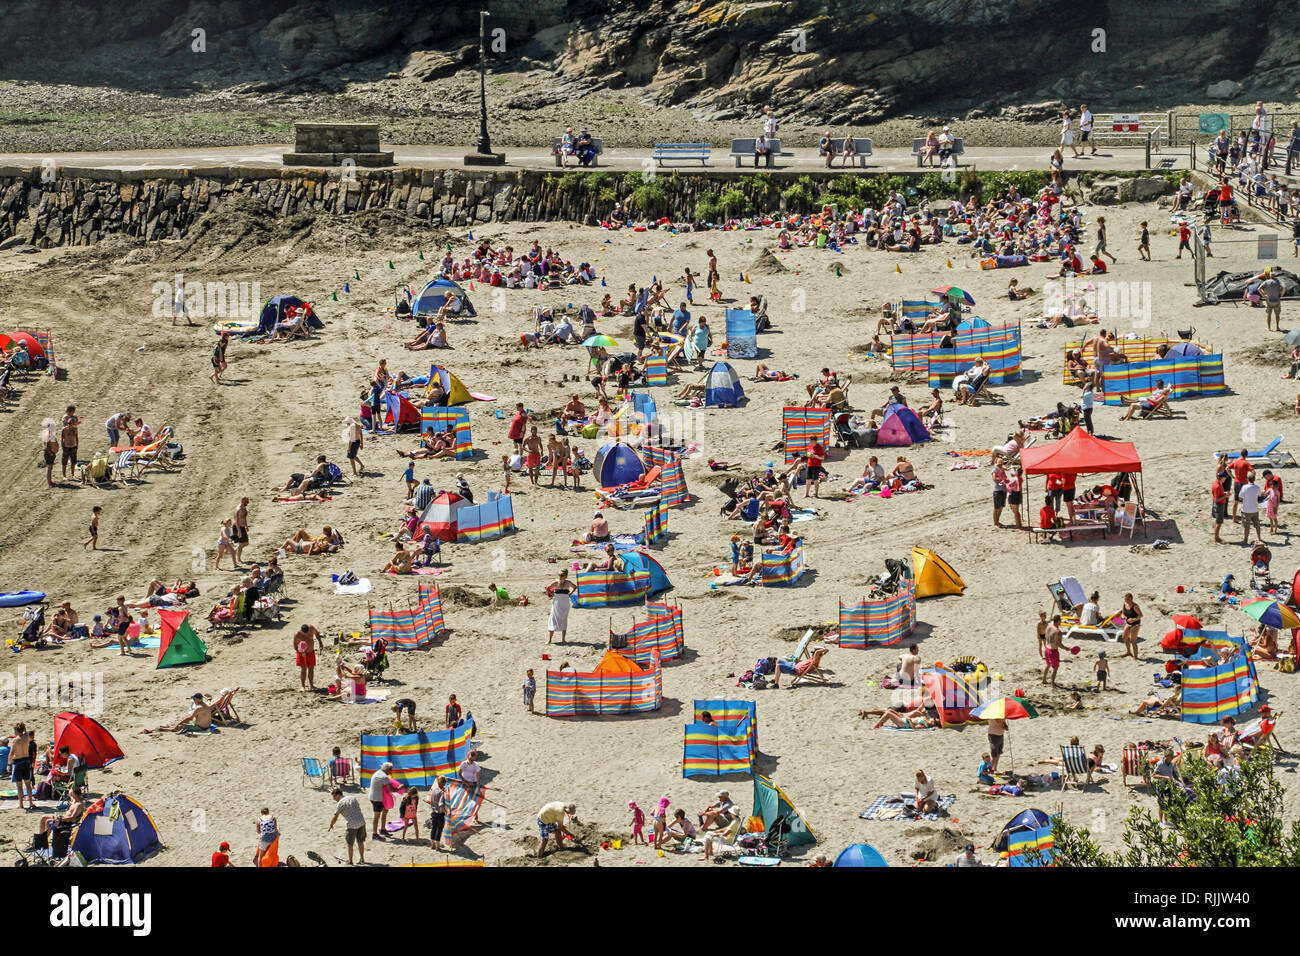 Visitors enjoy the sunshine, sand and sea on the popular beach at East Looe in Cornwall. Stock Photo